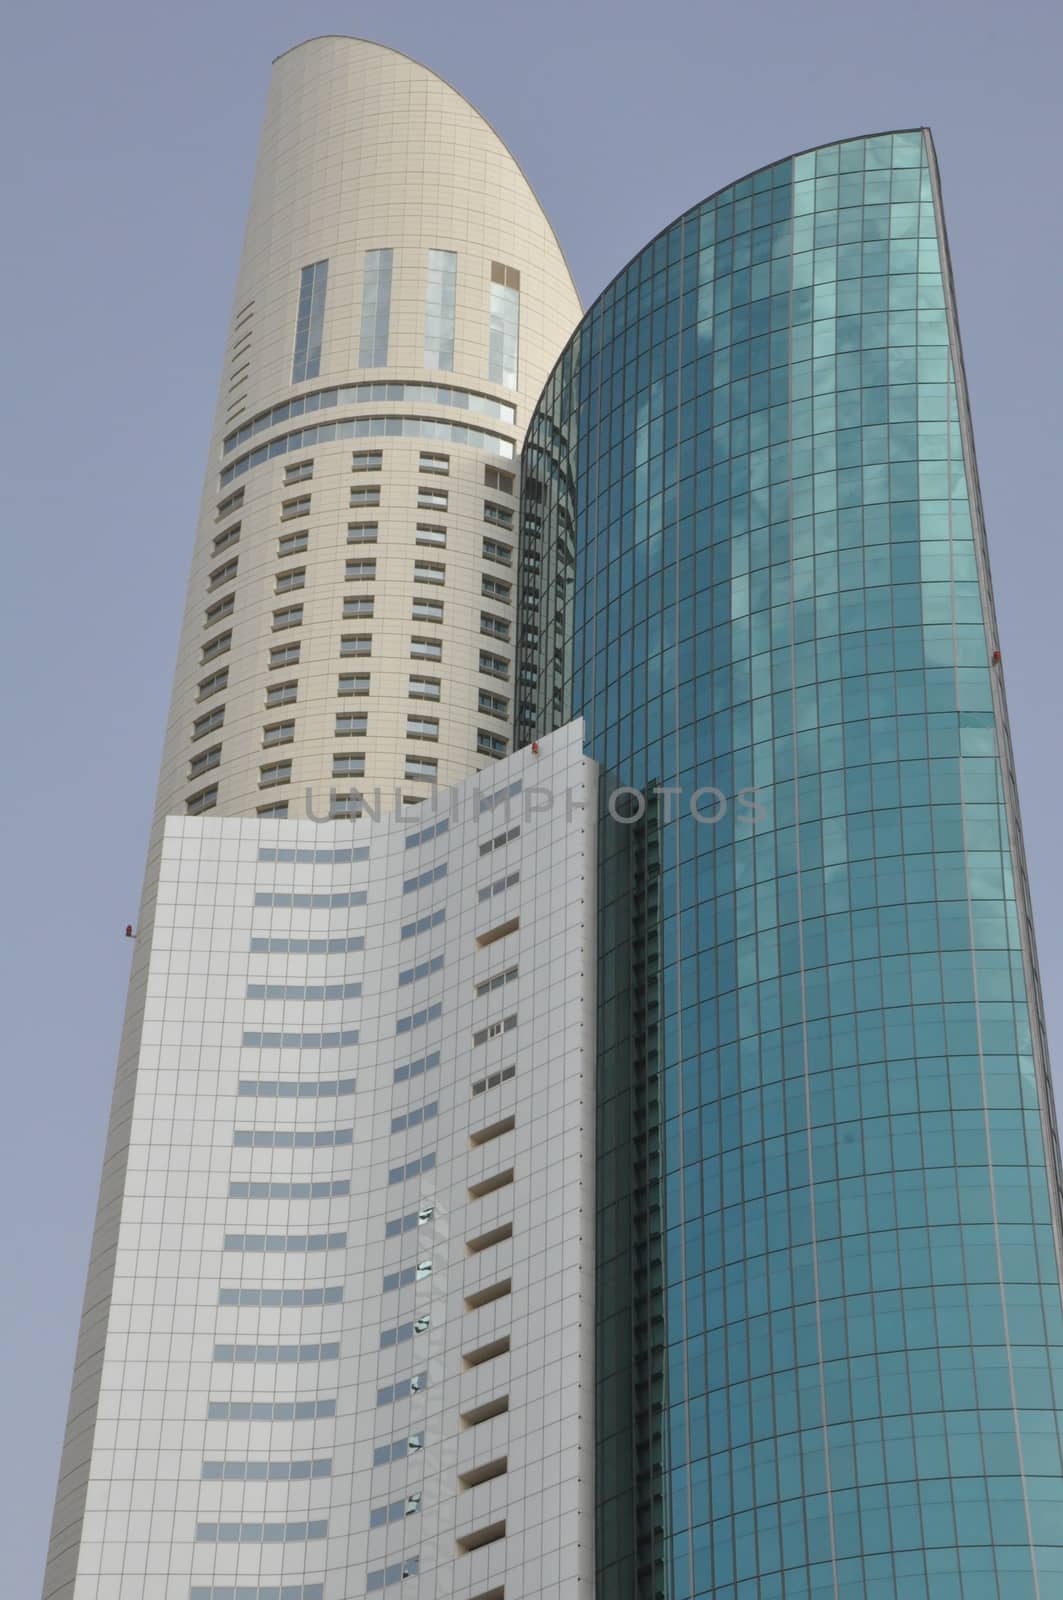 Ascott Park Place in Dubai, UAE. The tower is one of the tallest buildings in Dubai.